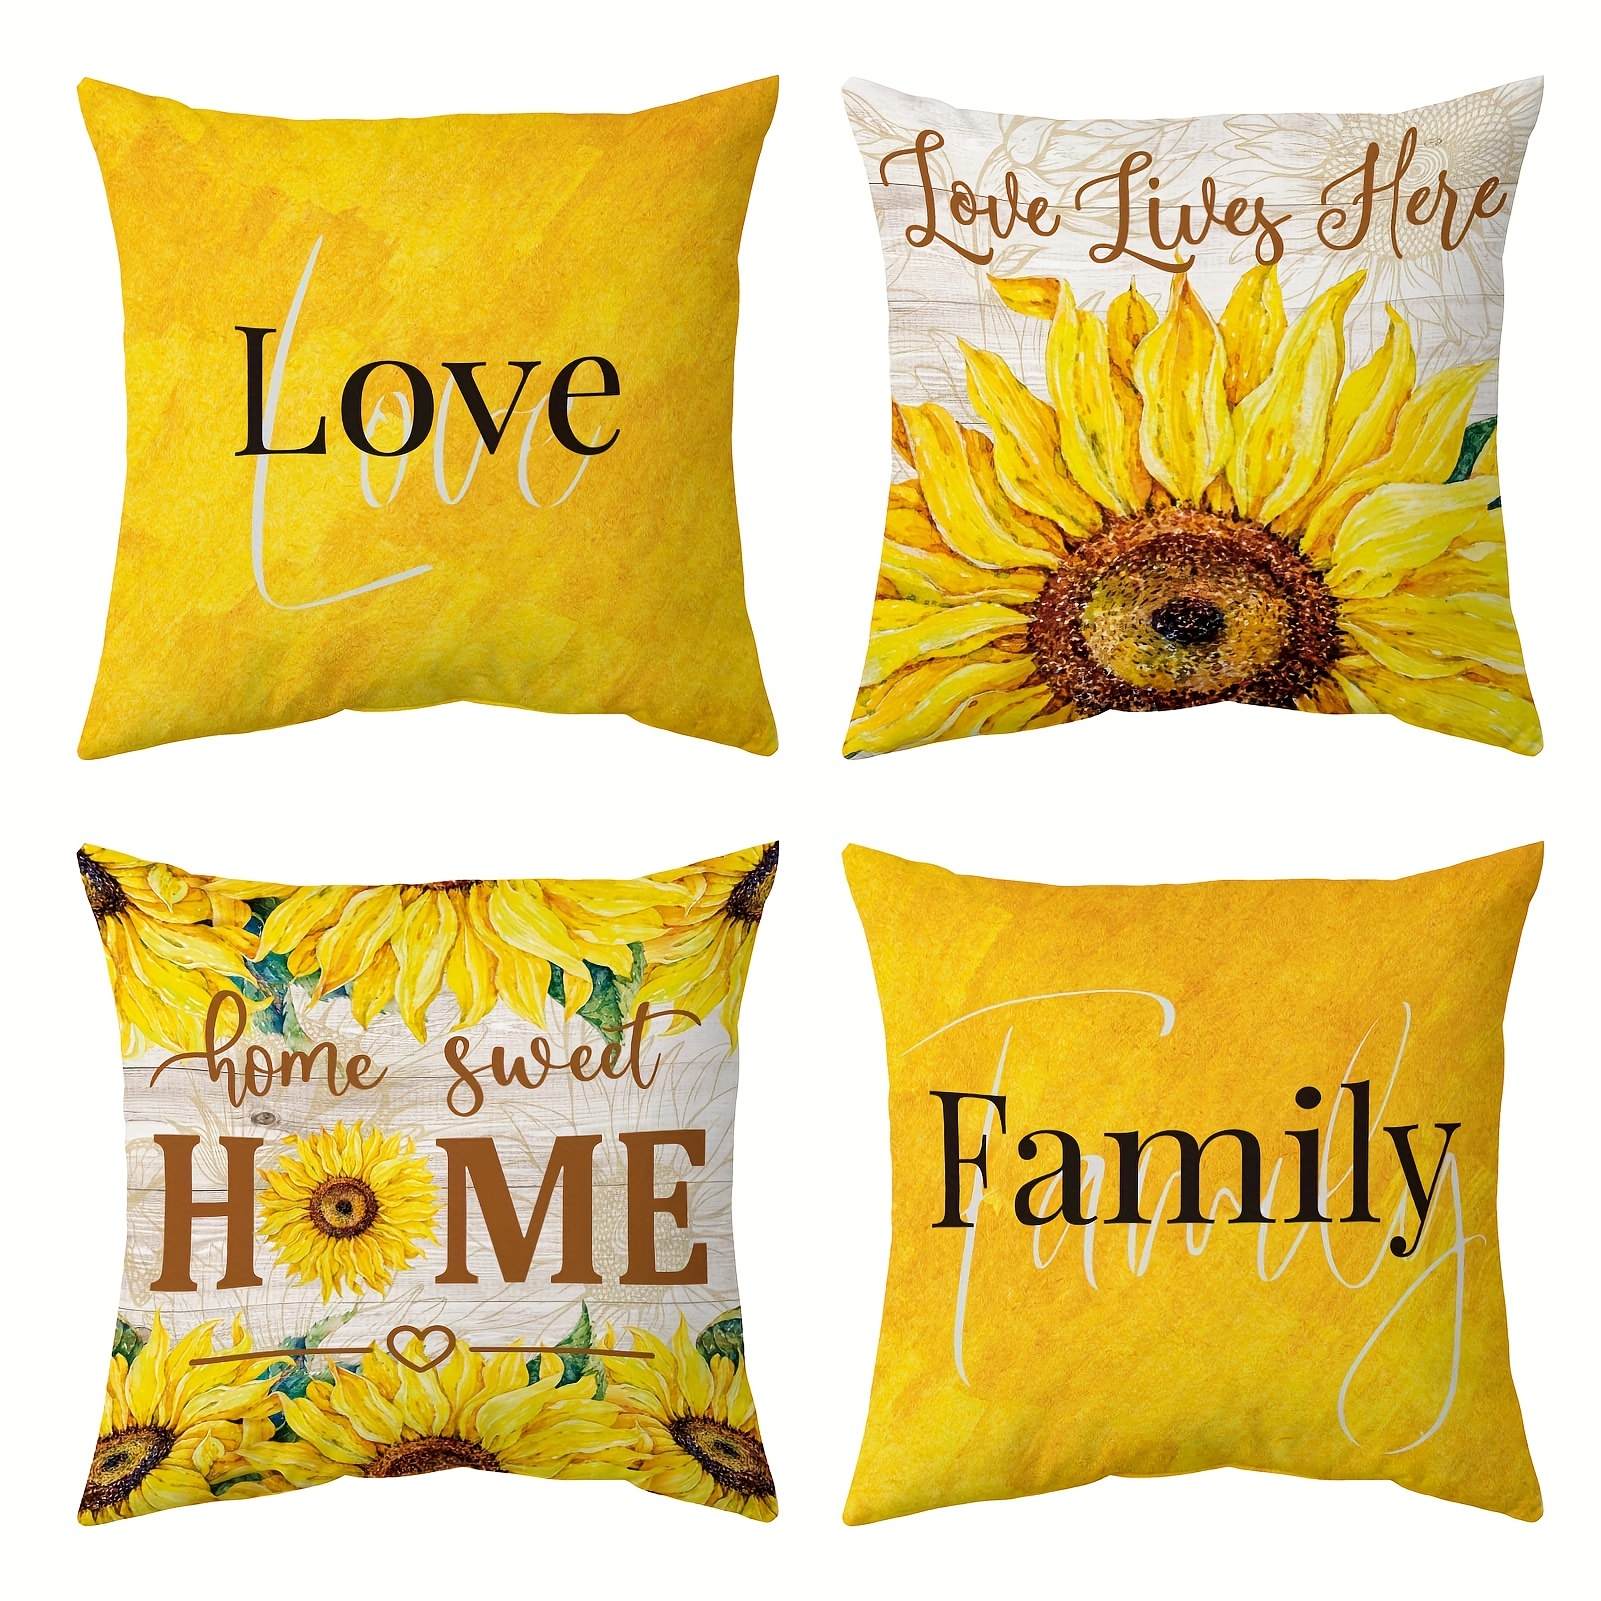 

Sunflower Throw Pillow Covers Set Of 4, Summer Outdoor Yellow Sunflowers Floral Throw Pillow Case For Sofa Bedroom Living Room Bed Couch Home Sweet Home Cushion Covers Decorative, 18 X 18 Inches